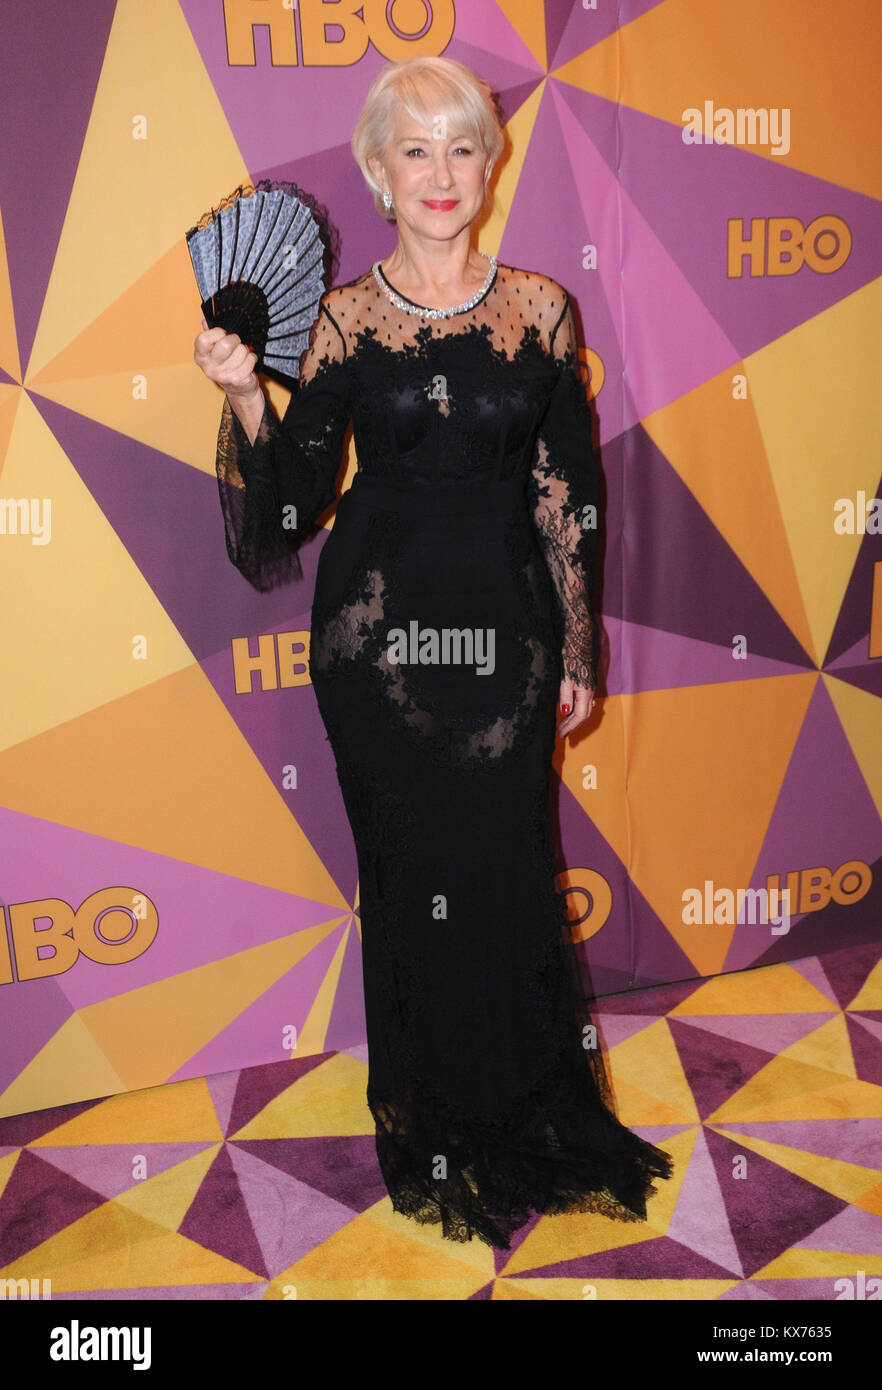 January 7, 2018 - Beverly Hills, CA, U.S. - 07 January 2018 - Beverly Hills, California - Helen Mirren. 2018 HBO Golden Globes After Party held at The Beverly Hilton Hotel in Beverly Hills. Photo Credit: Birdie Thompson/AdMedia (Credit Image: © Birdie Thompson/AdMedia via ZUMA Wire) Stock Photo